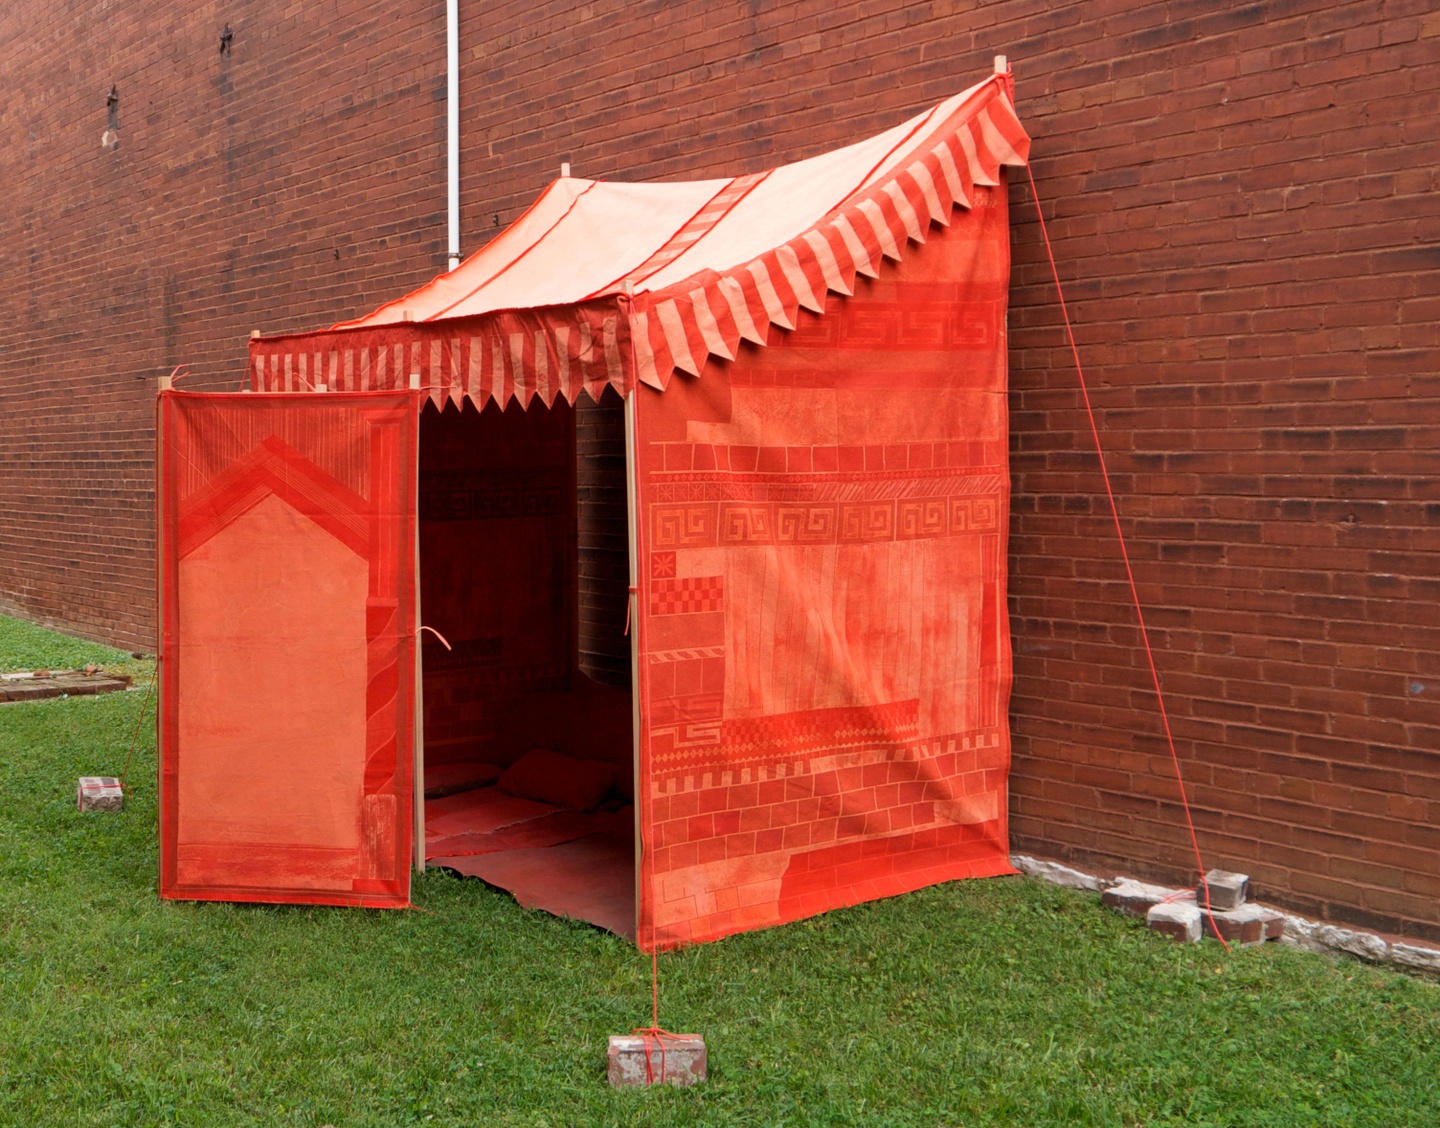 Against a brick wall on green grass, an installation: a tent anchored to the ground with bricks. The tent is bright red/vermilion and light coral, its door open. The interior of the tent is dark. Faint geometric patterns appear on the side of the tent.